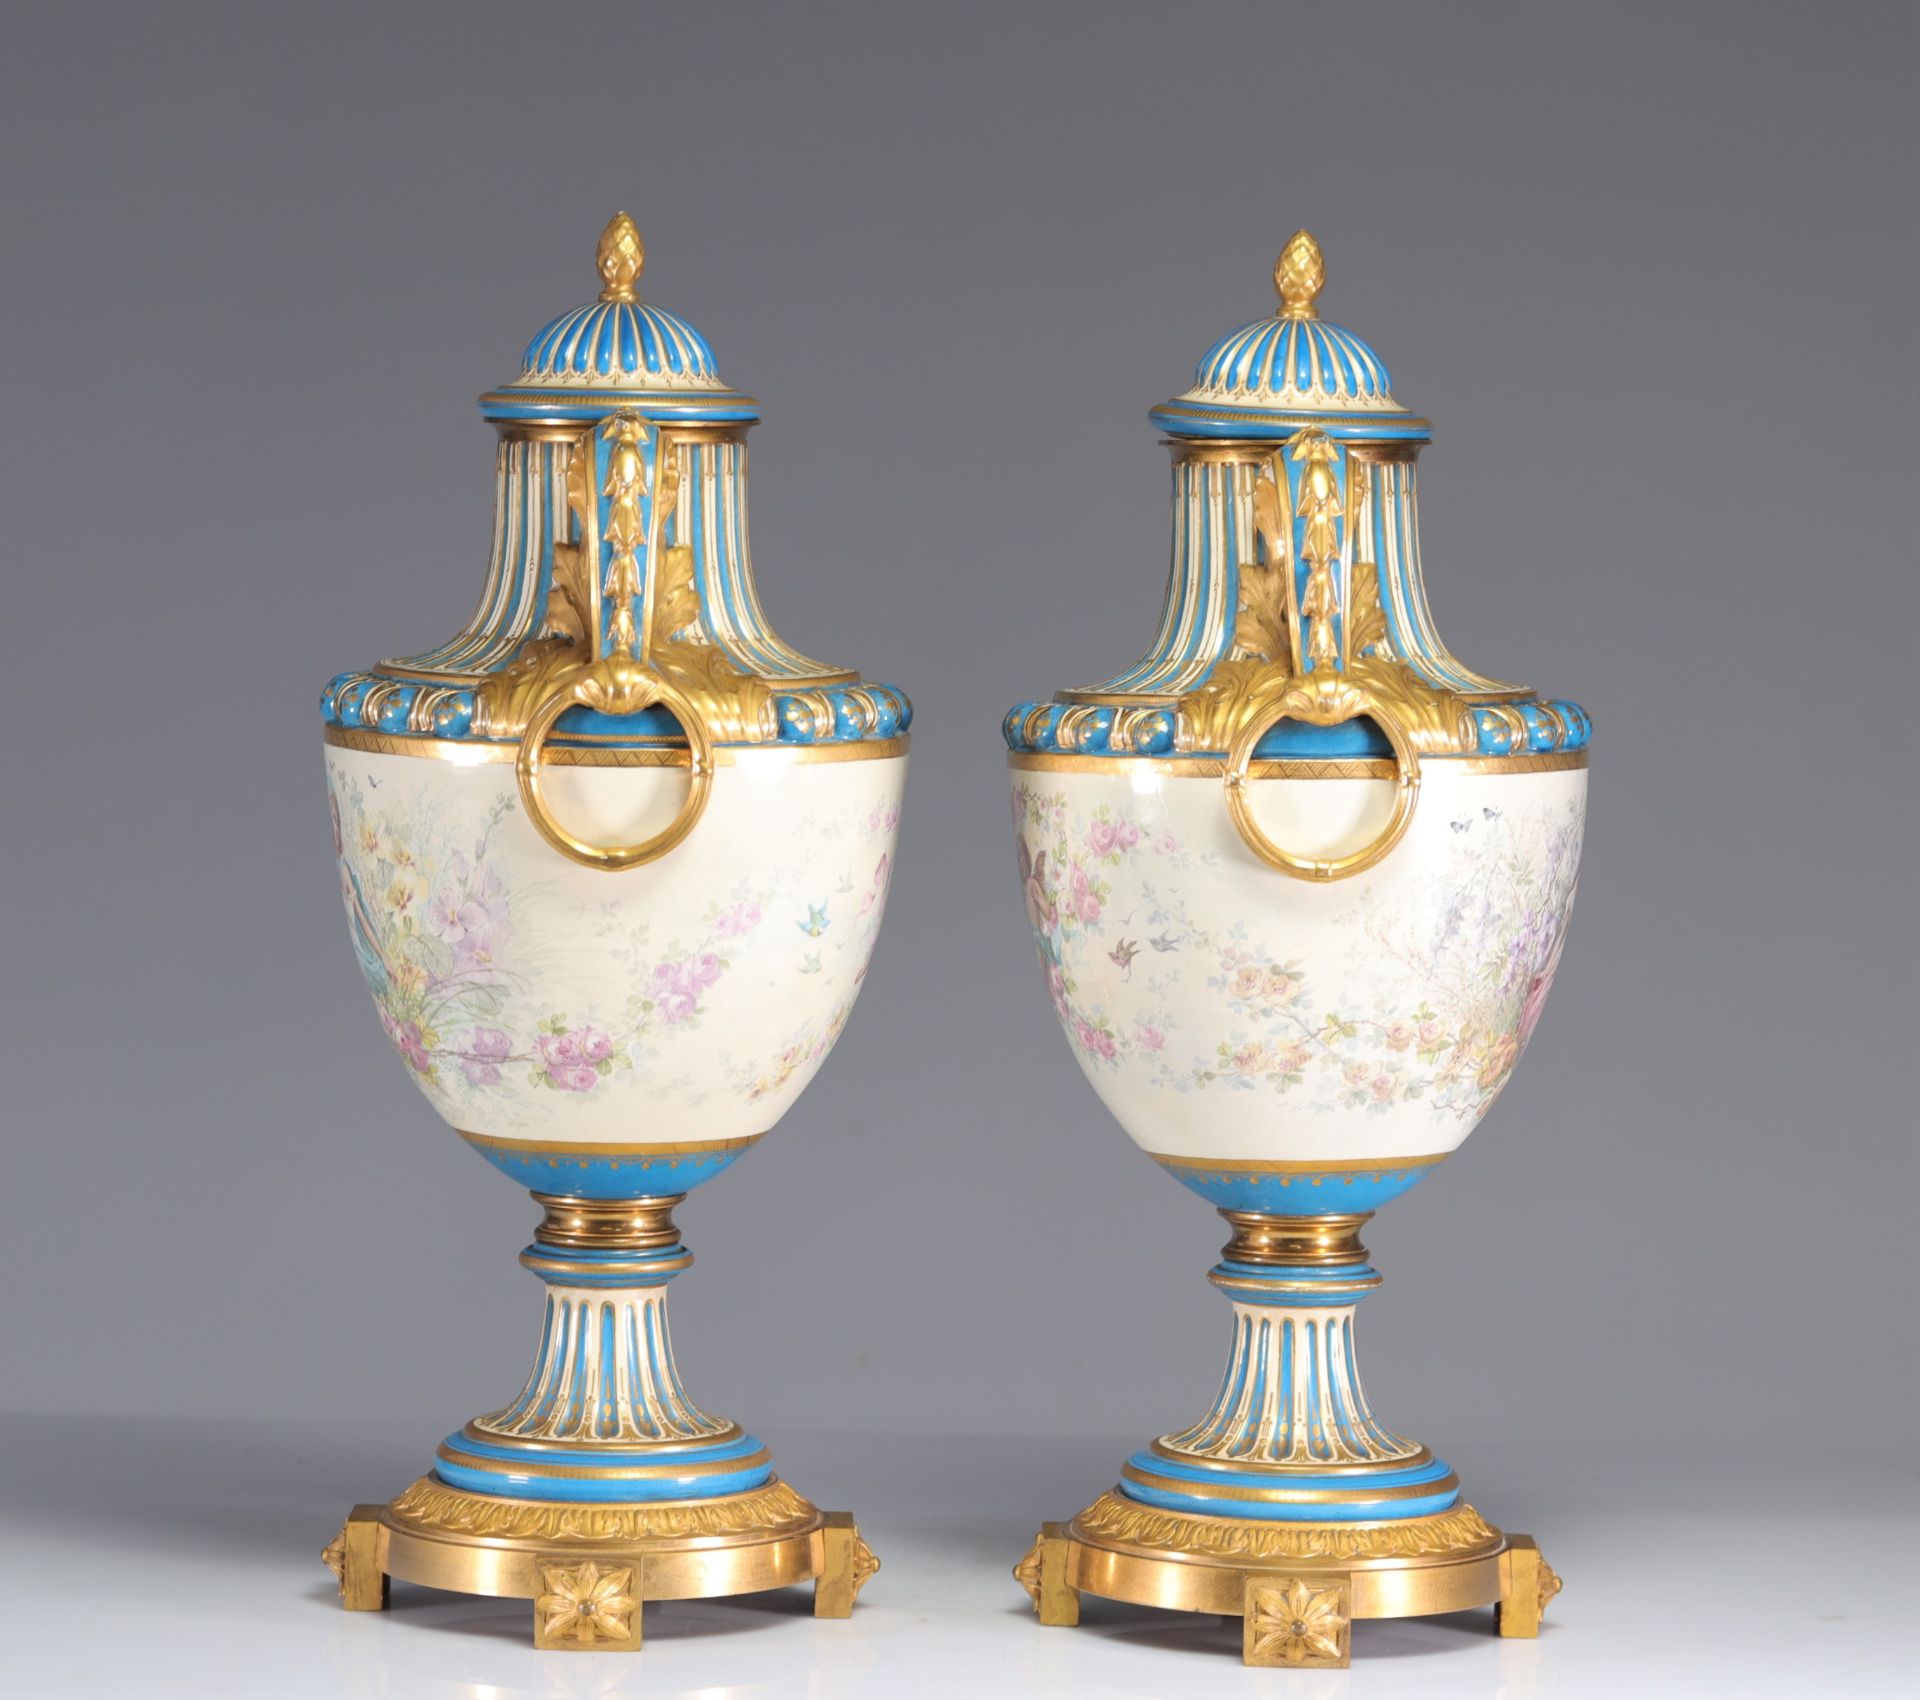 Sevres imposing pair of vases decorated with romantic scenes and cupids in gilded bronze - Image 2 of 8